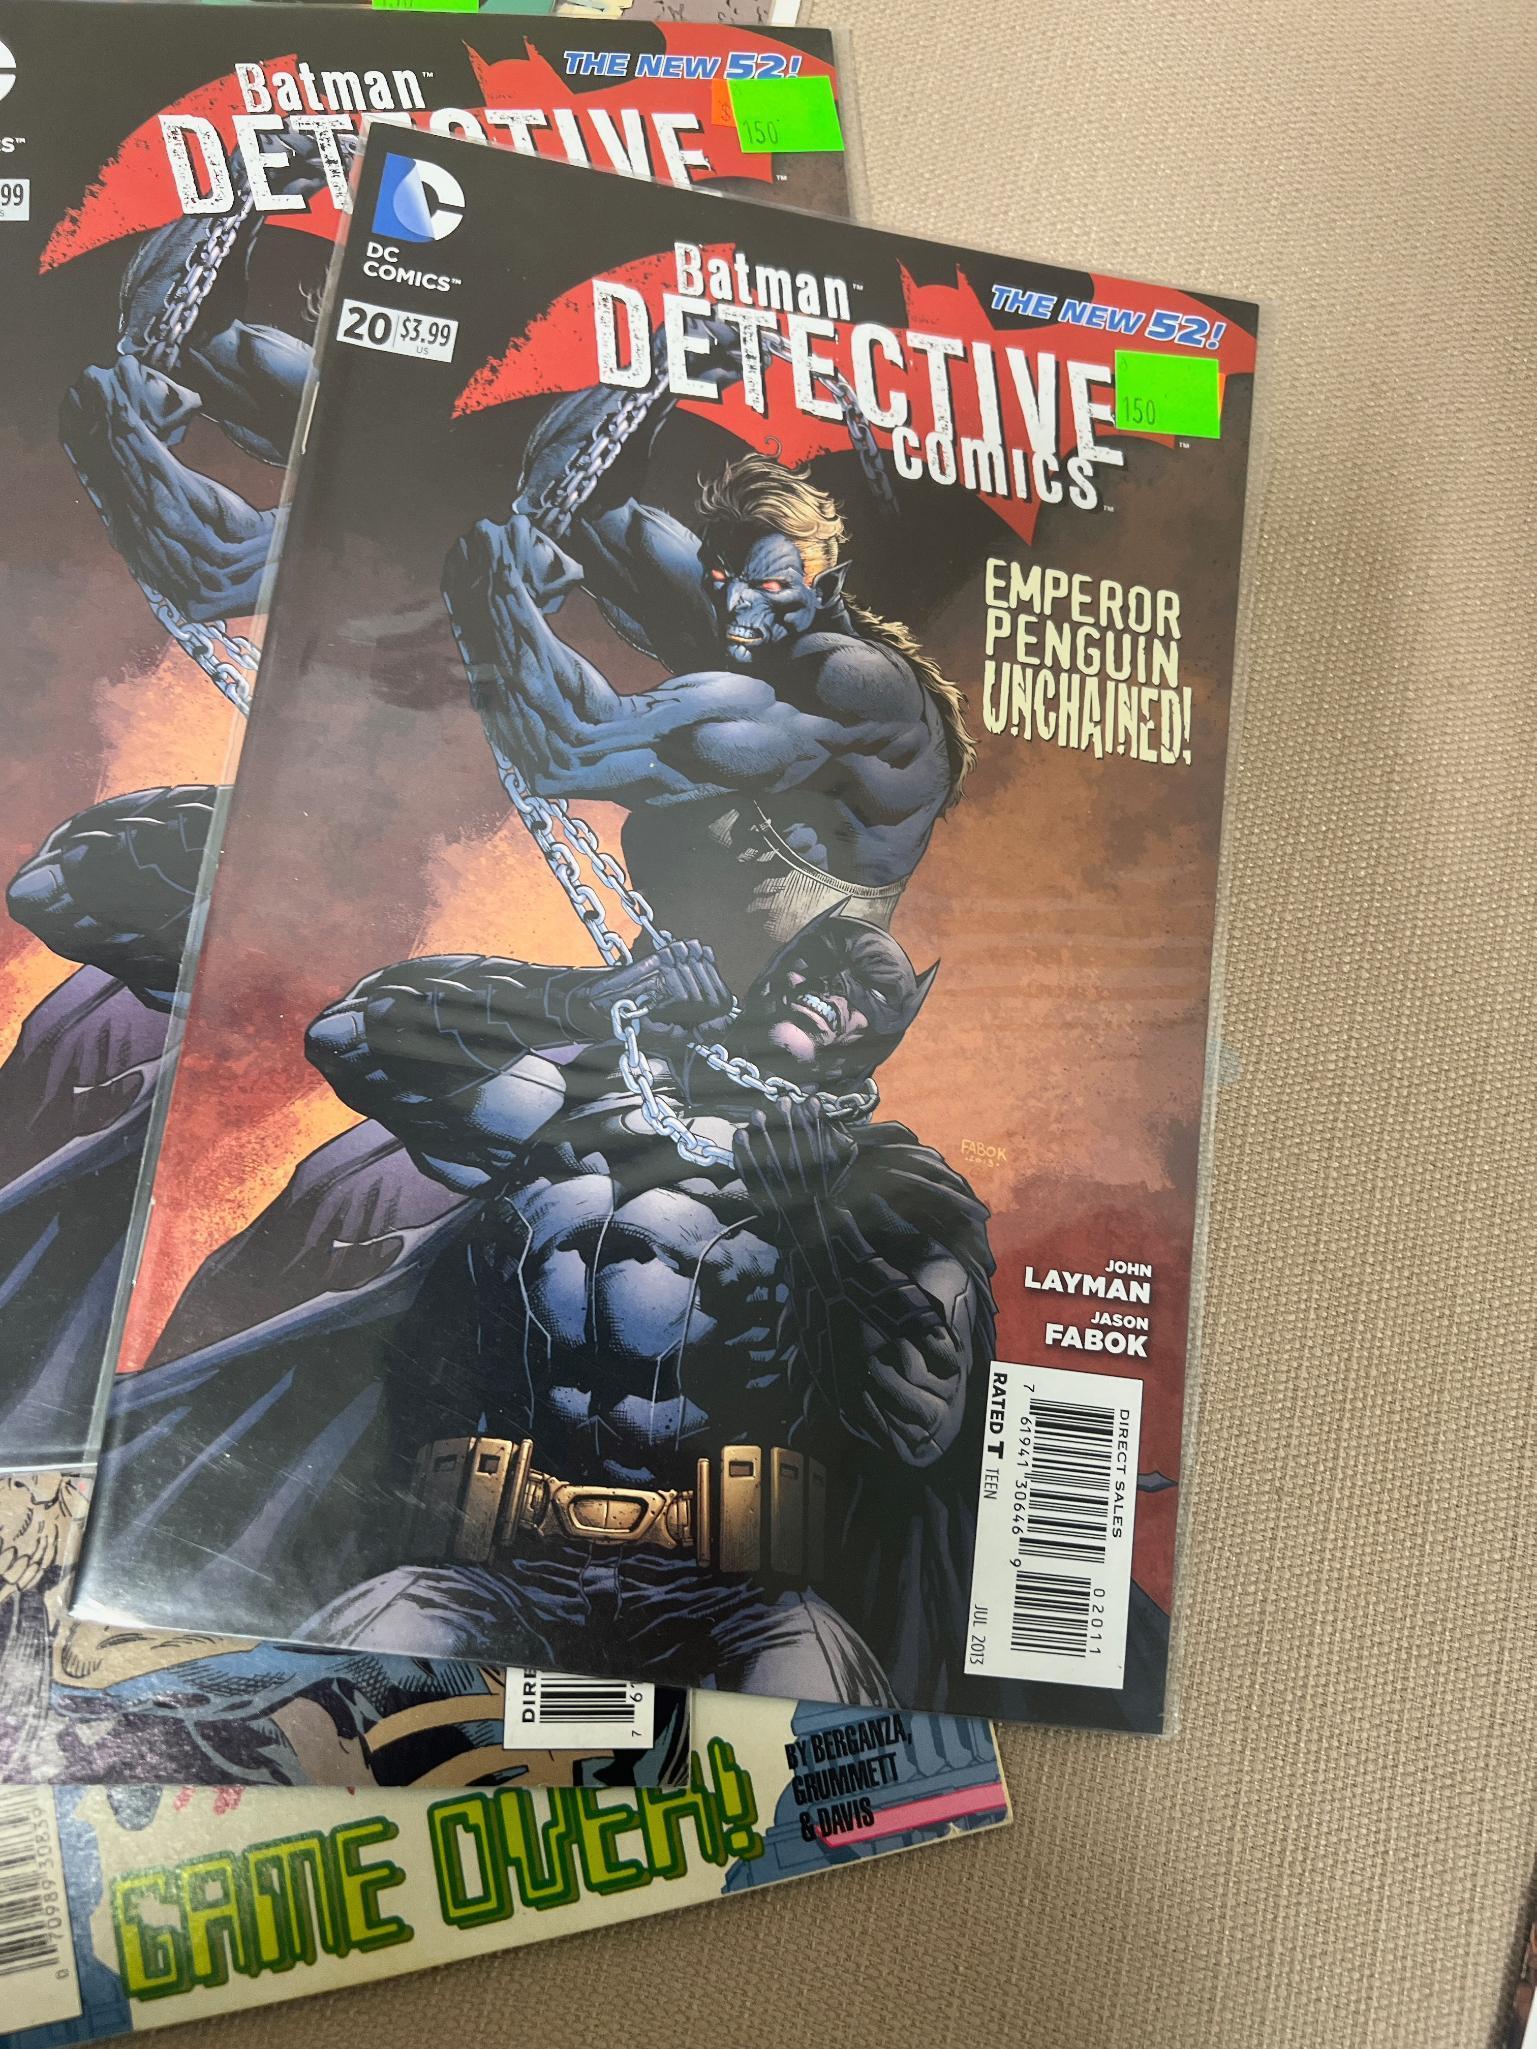 DC Comic lot, Batman and Superman among others, some older dates, and Action, Justice League & more